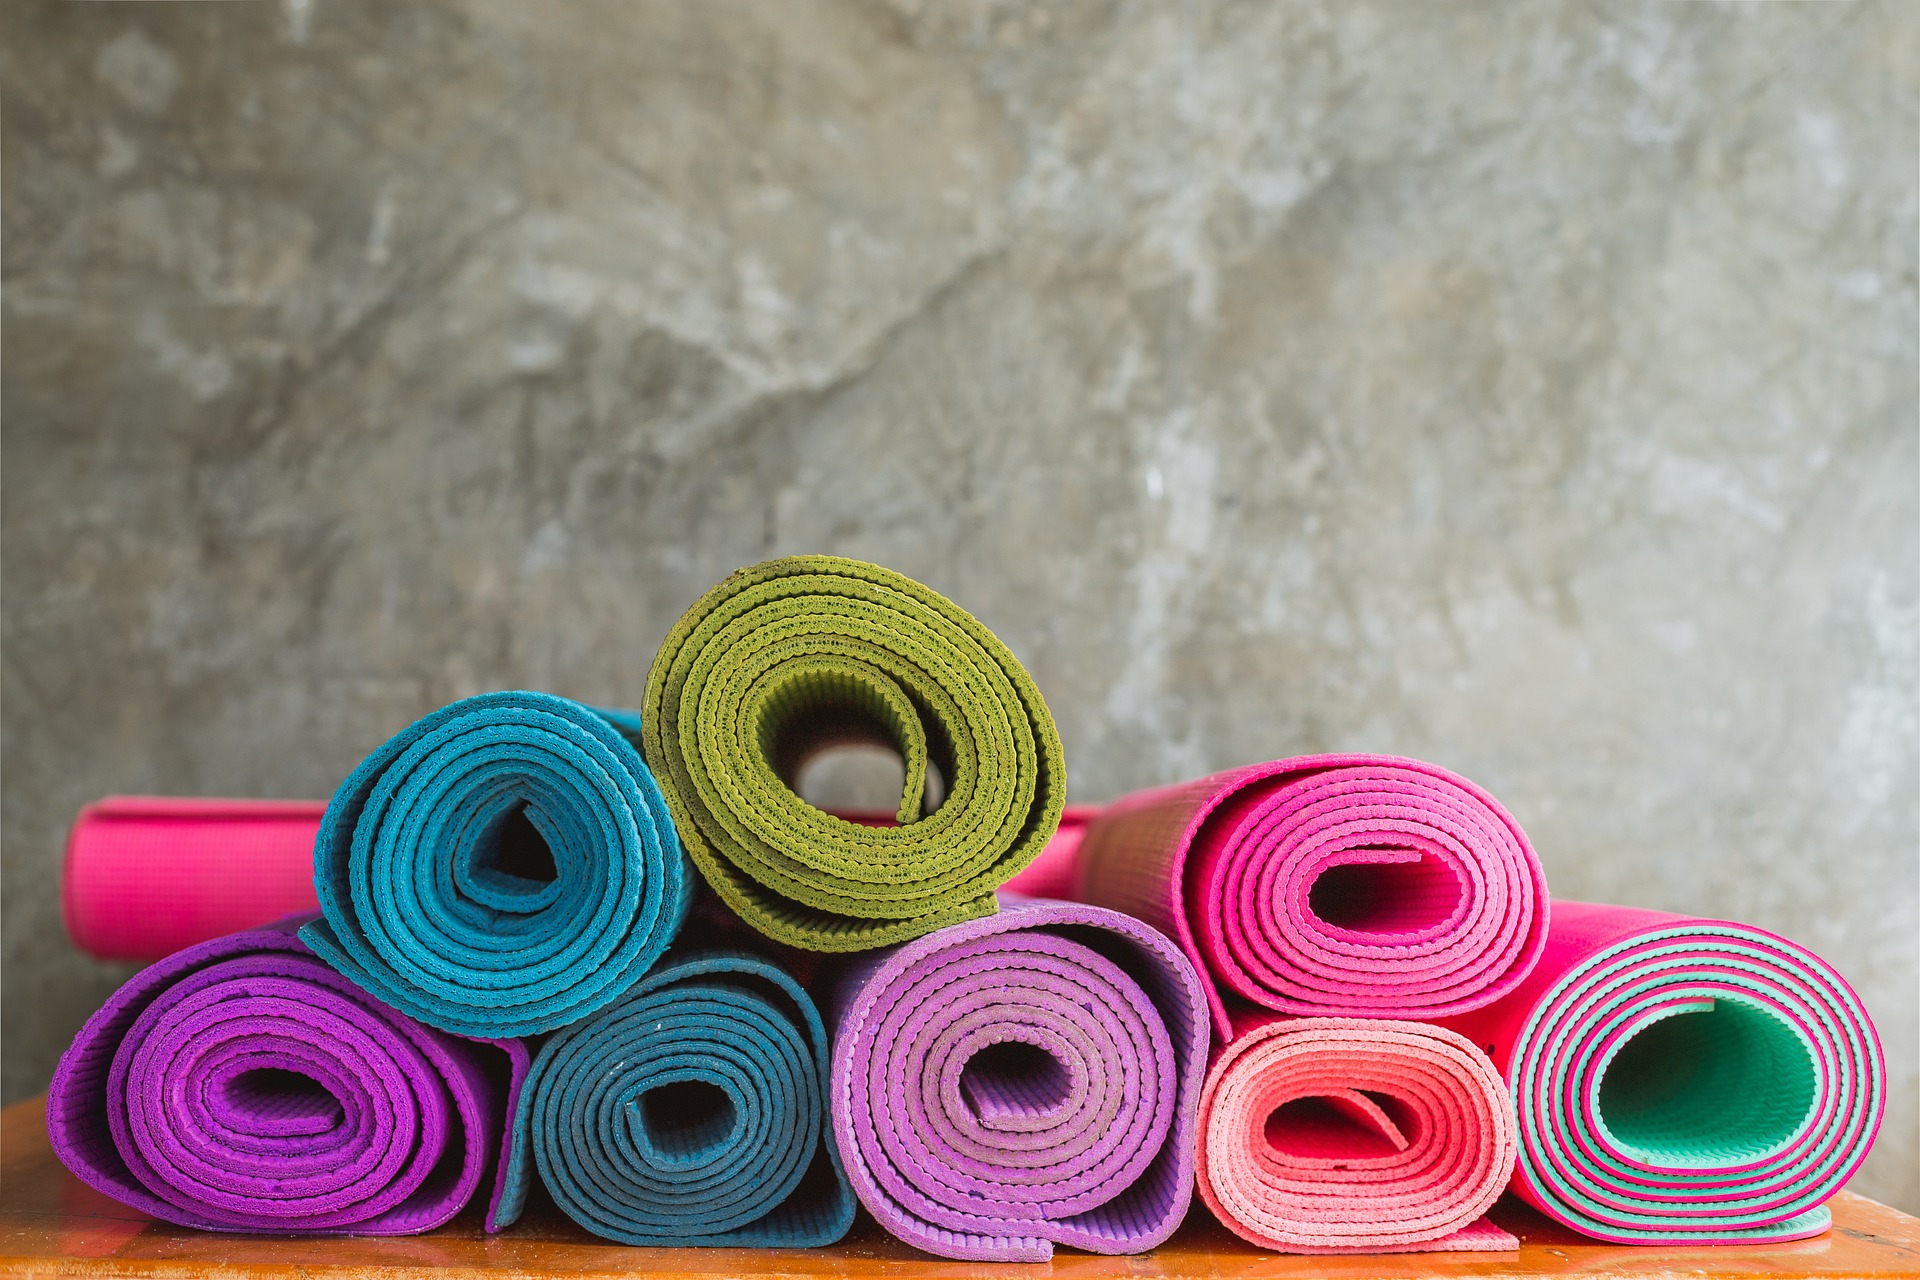 Yoga mats: how to maintain them?